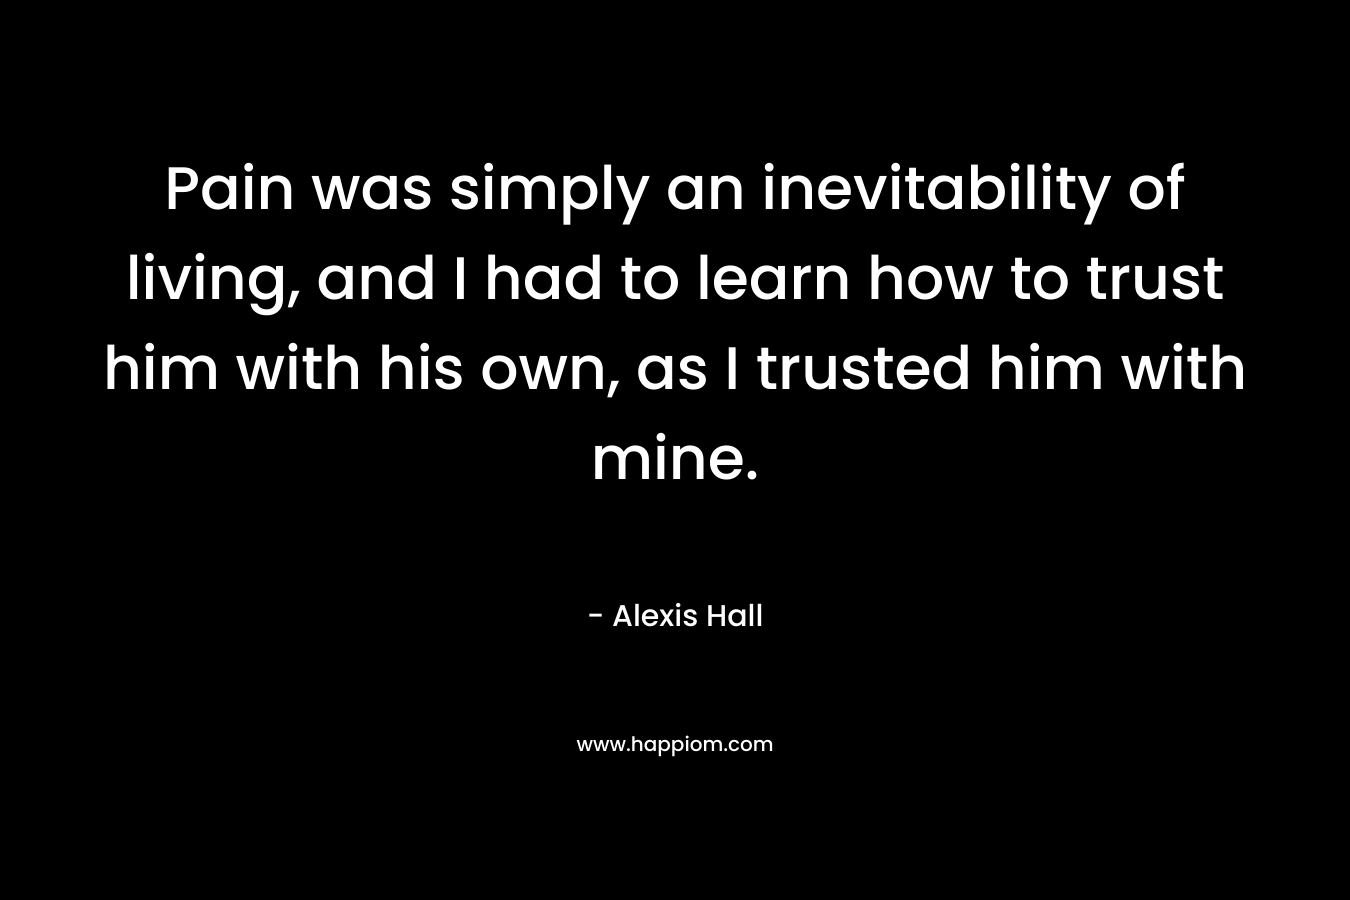 Pain was simply an inevitability of living, and I had to learn how to trust him with his own, as I trusted him with mine. – Alexis  Hall